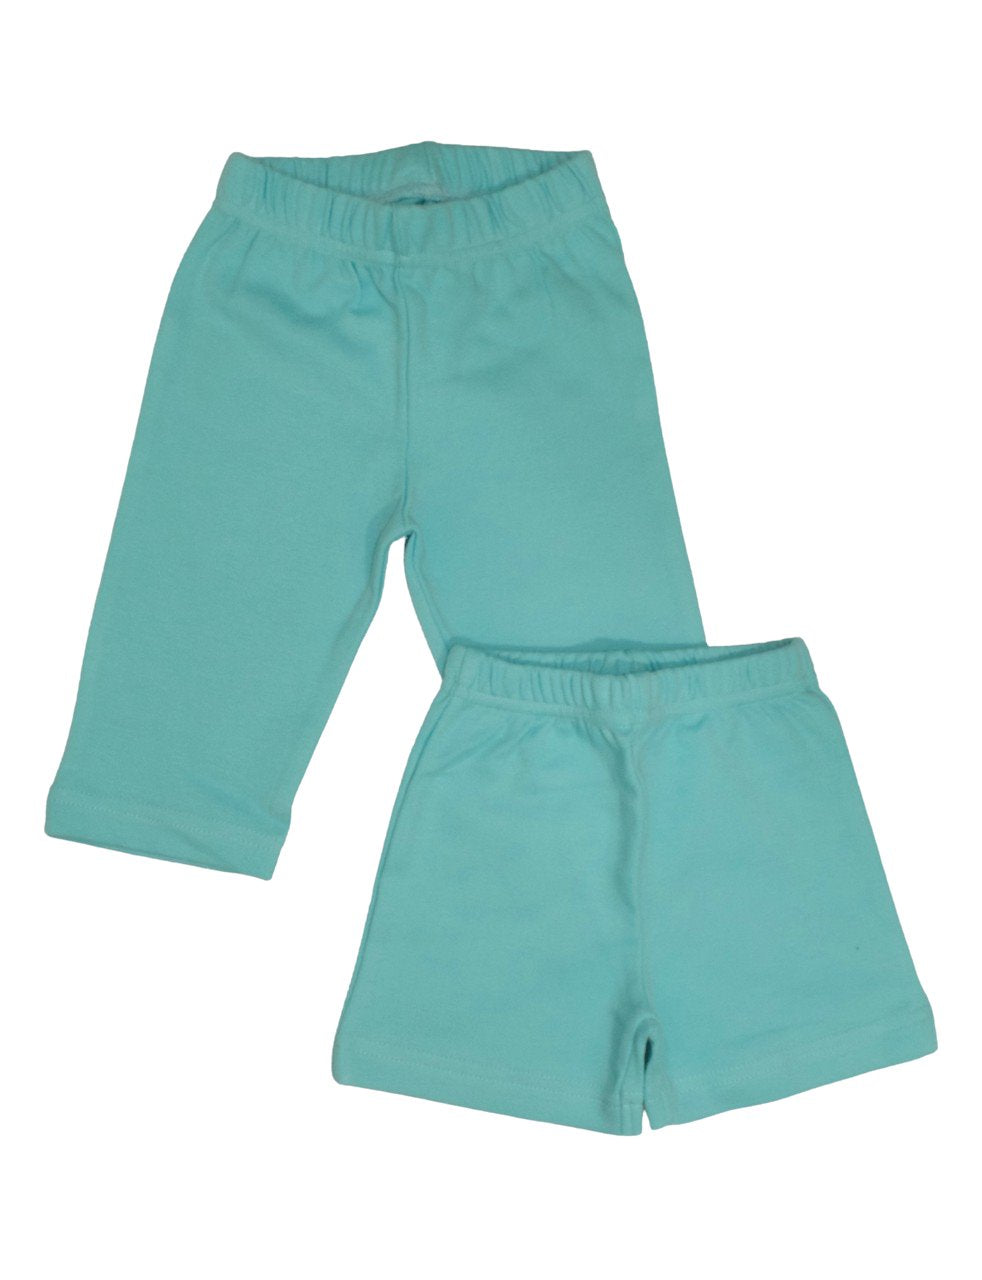 Pull on Pants & Shorts- Available in 4 Colors Baby Passion Lilie 